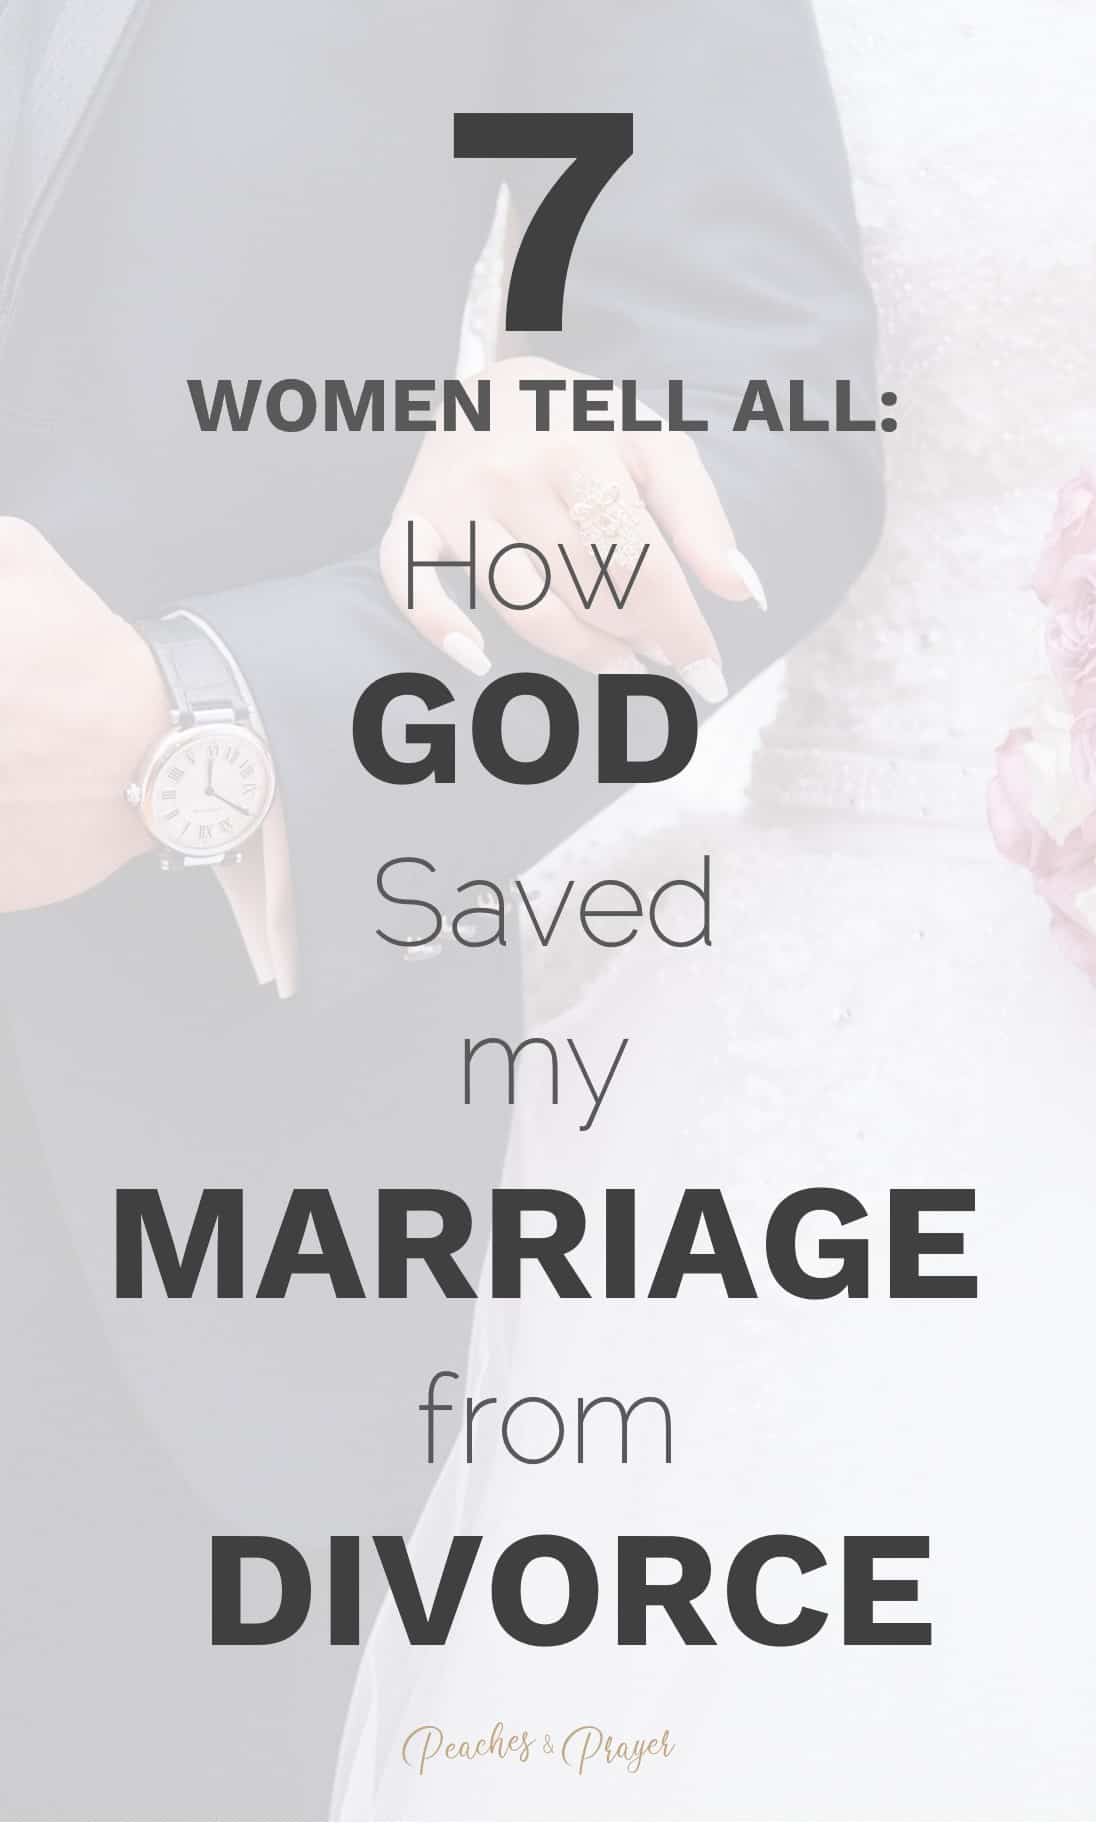 God Saved My Marriage from Divorce Testimonies: 6 Women Tell All